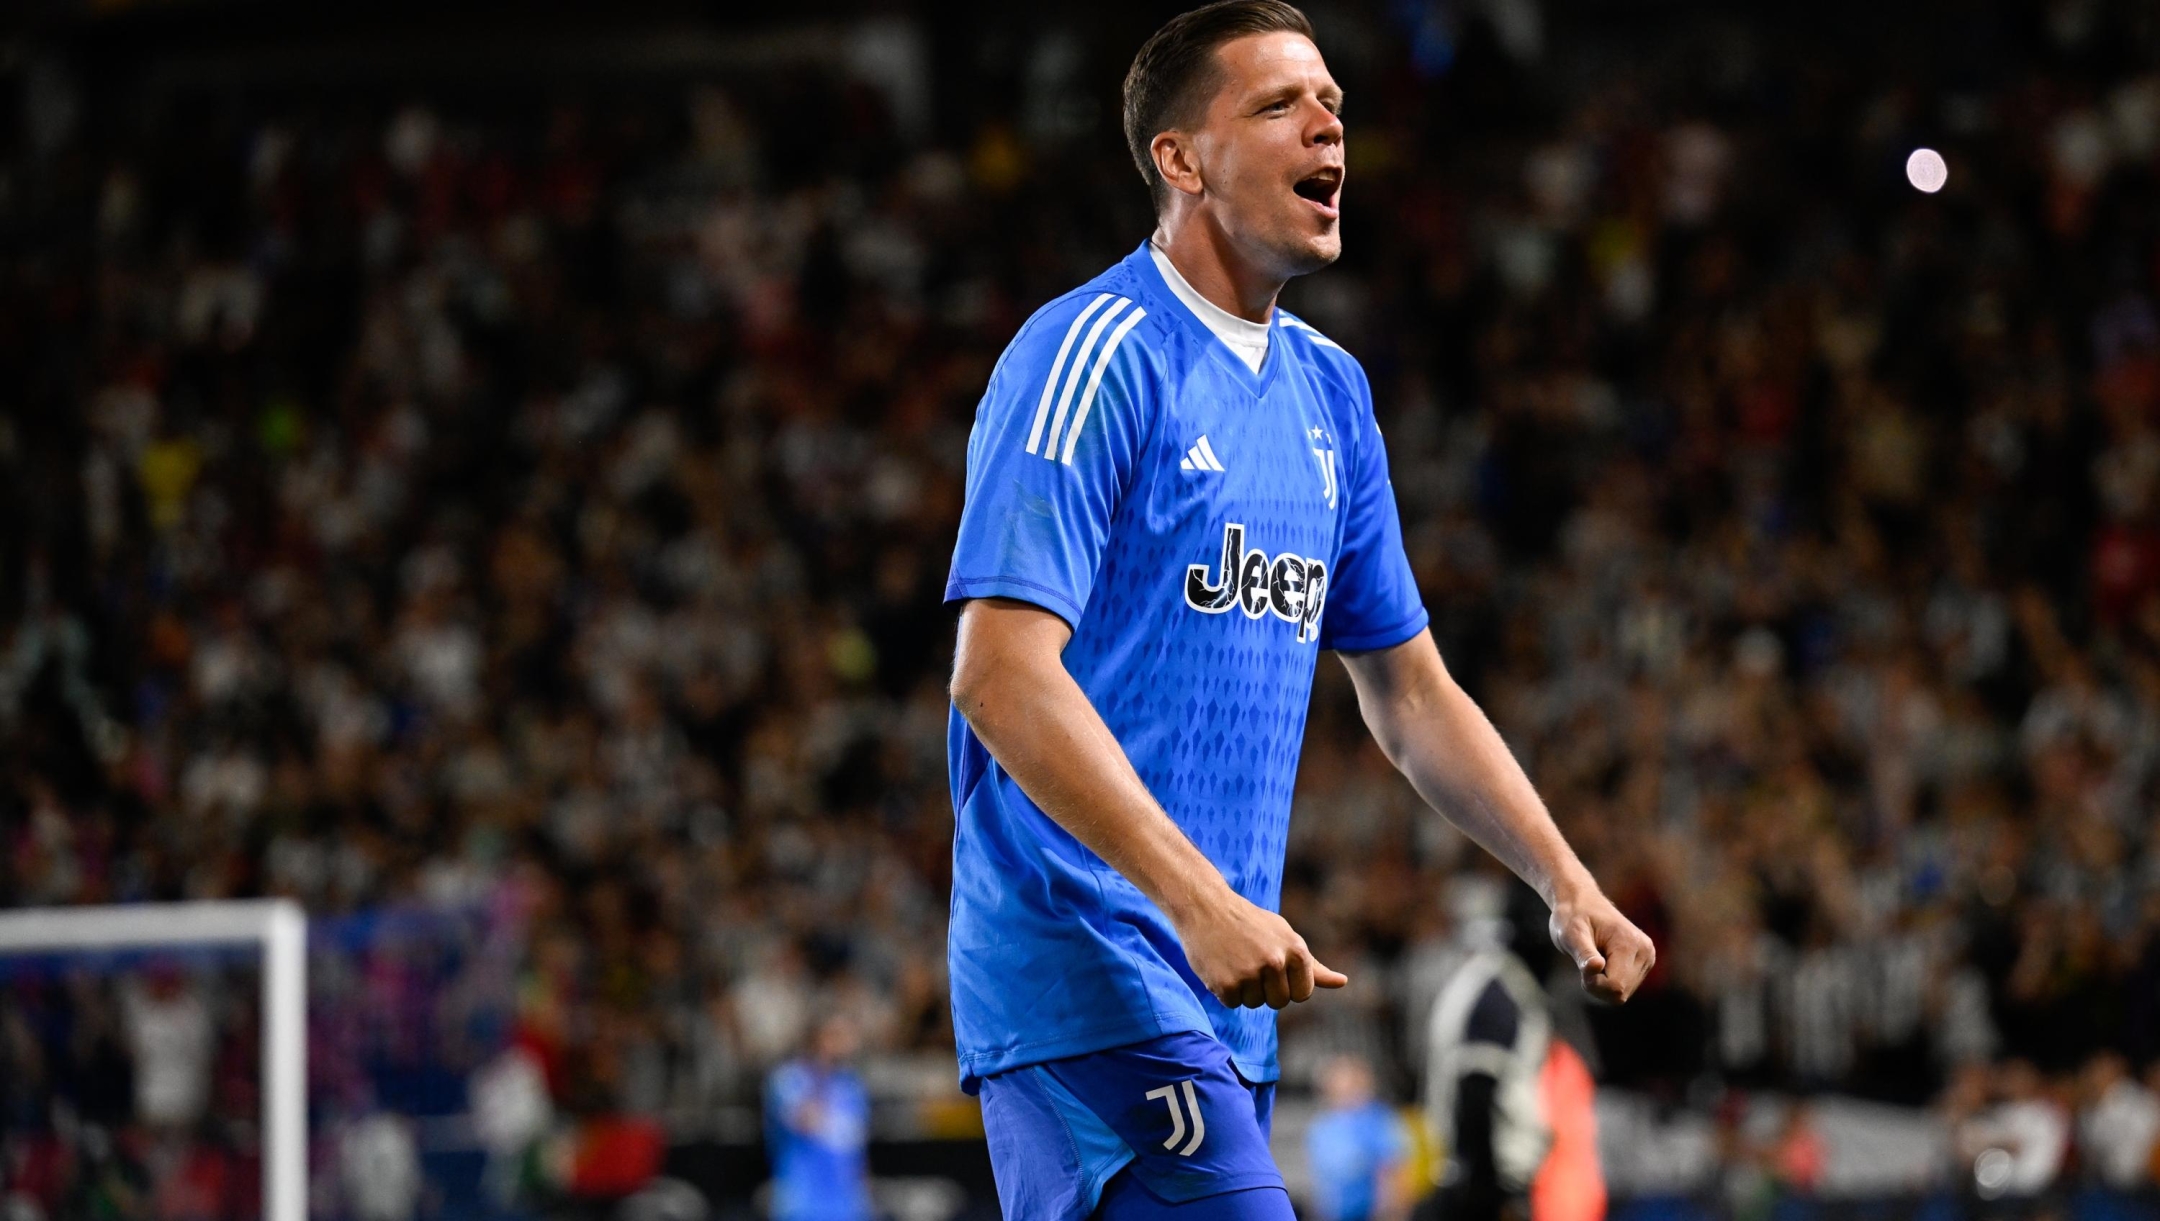 CARSON, CALIFORNIA - JULY 27: Wojciech Szczesny #1 of Juventus celebrates during the pre-season friendly match against AC Milan at Dignity Health Sports Park on July 27, 2023 in Carson, California. (Photo by Daniele Badolato - Juventus FC/Juventus FC via Getty Images)